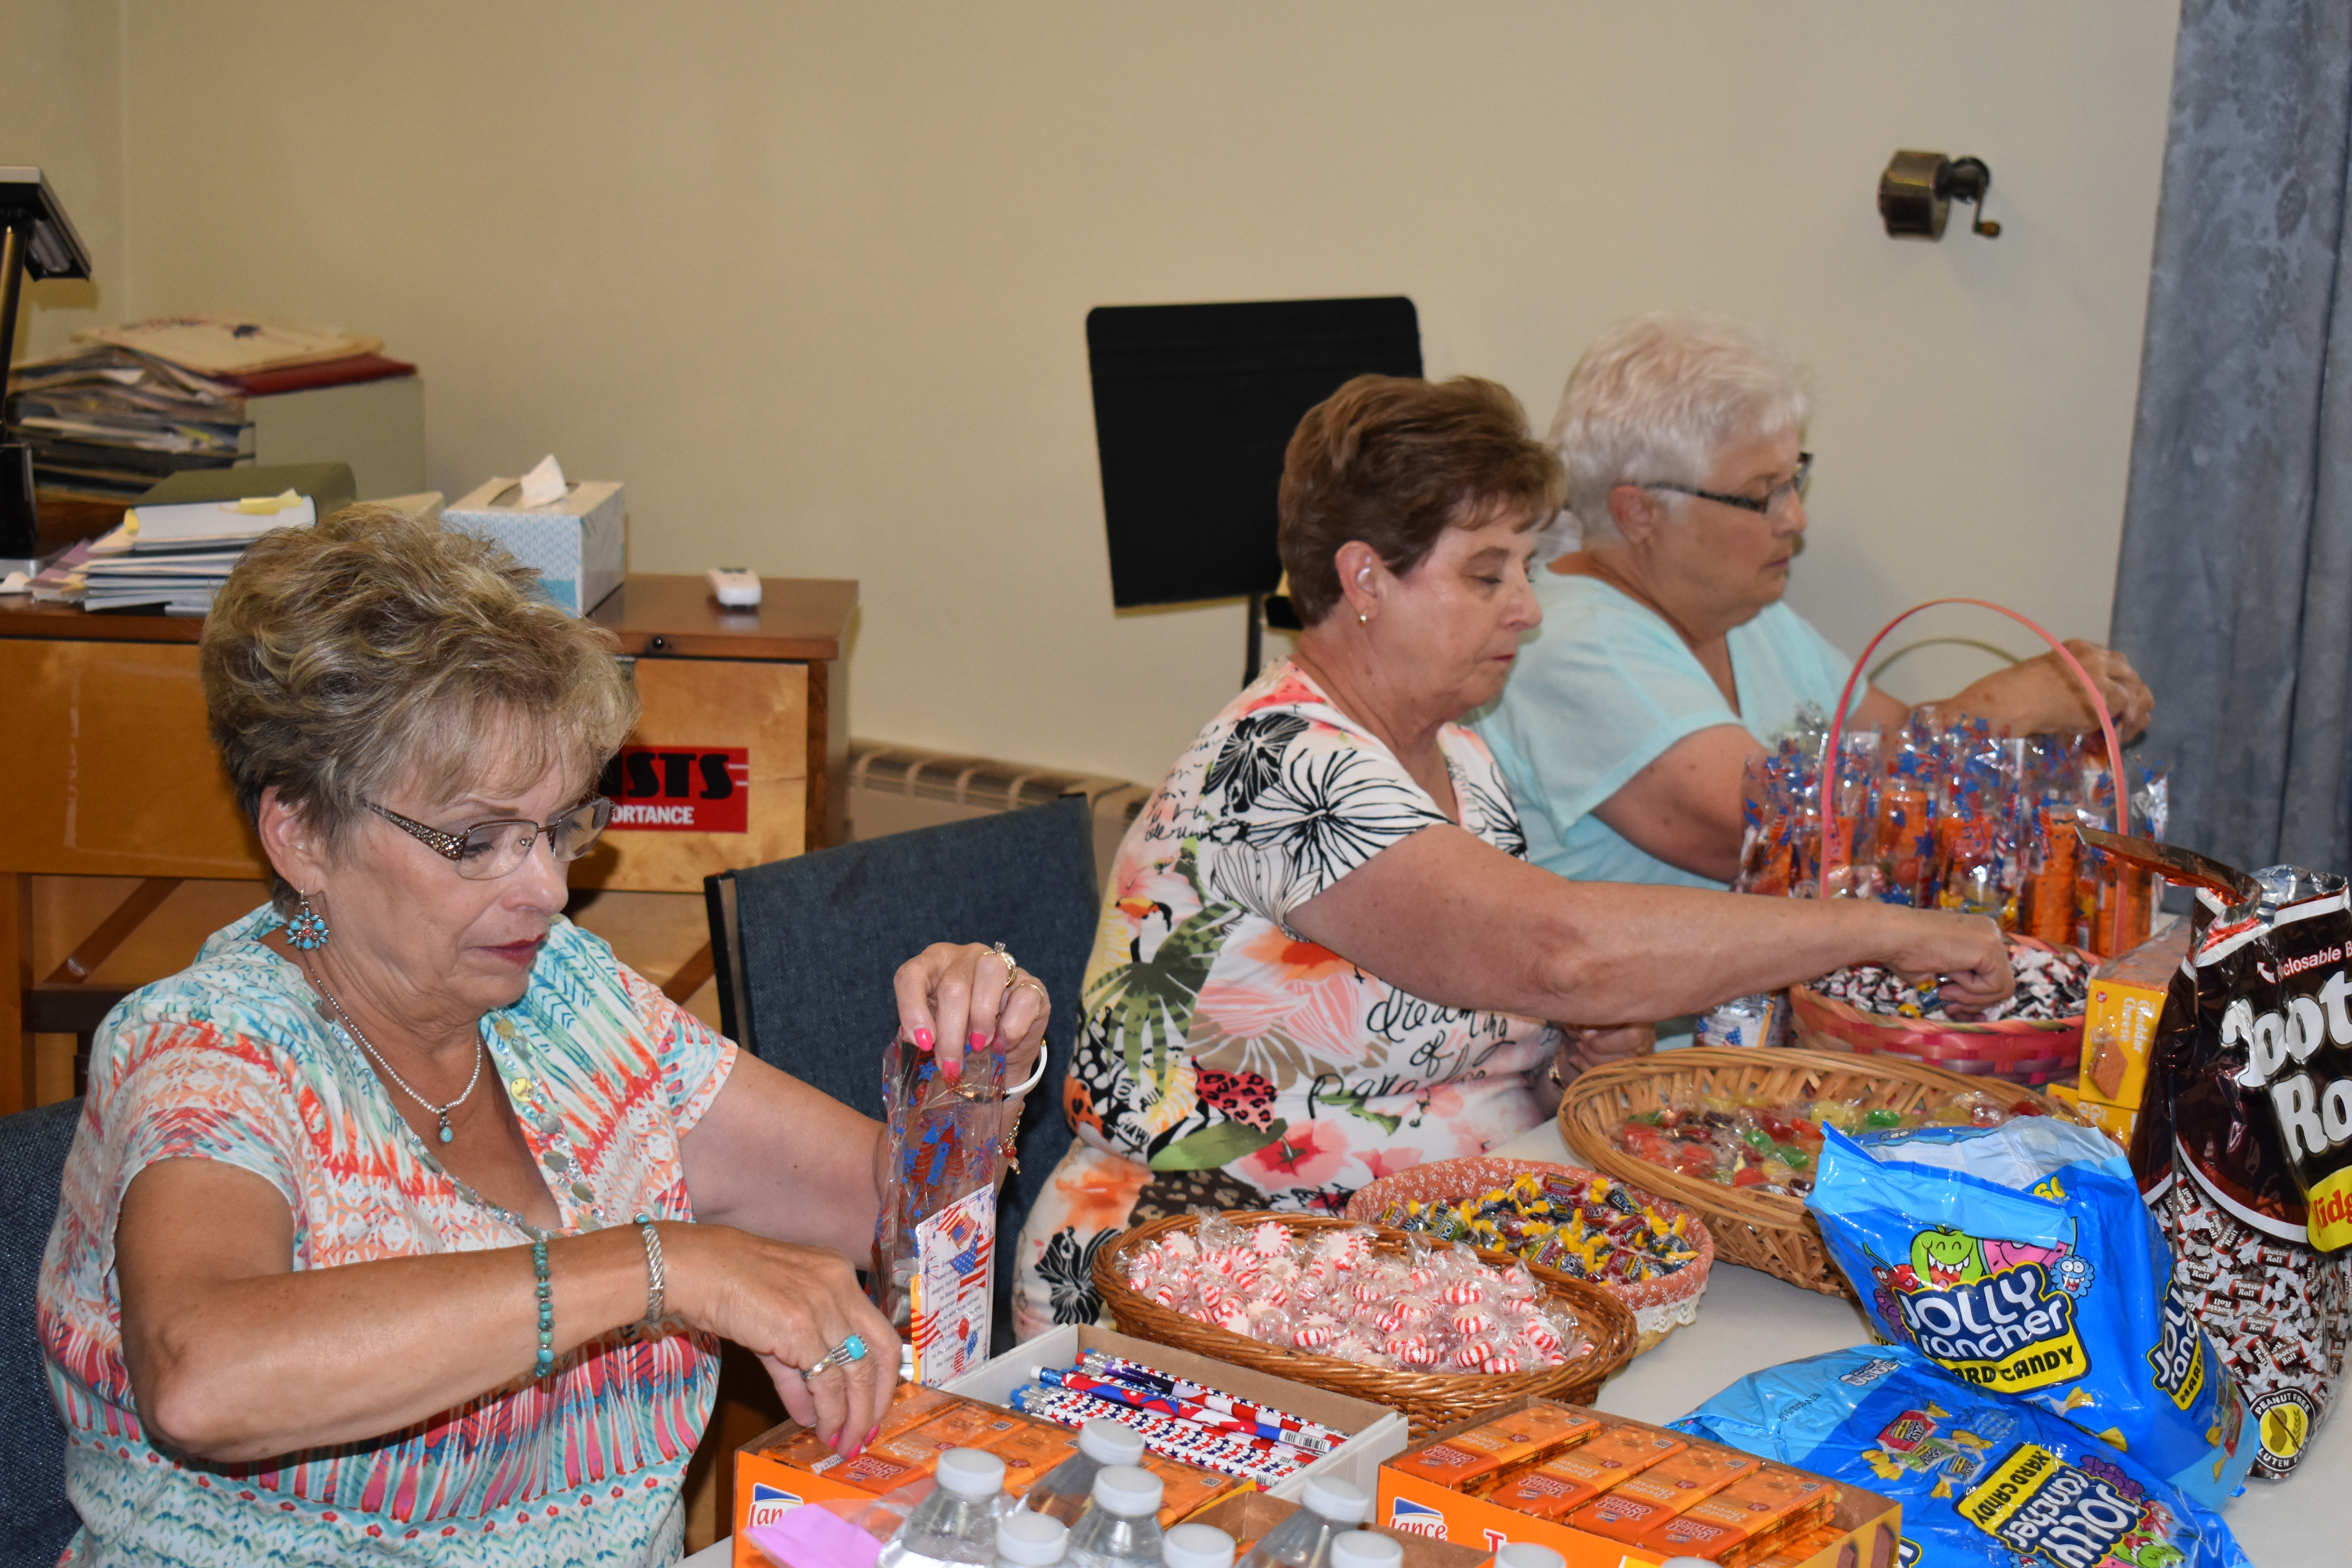 Summer Fest volunteers, from left, Diane Bullick, Elaine Obermiyer and Esther Medved stuff goody bags that will be handed out to active military personnel and veterans at Brookfield Summer Fest. The event, set for Aug. 10 and 11, will honor those who have served in the military.